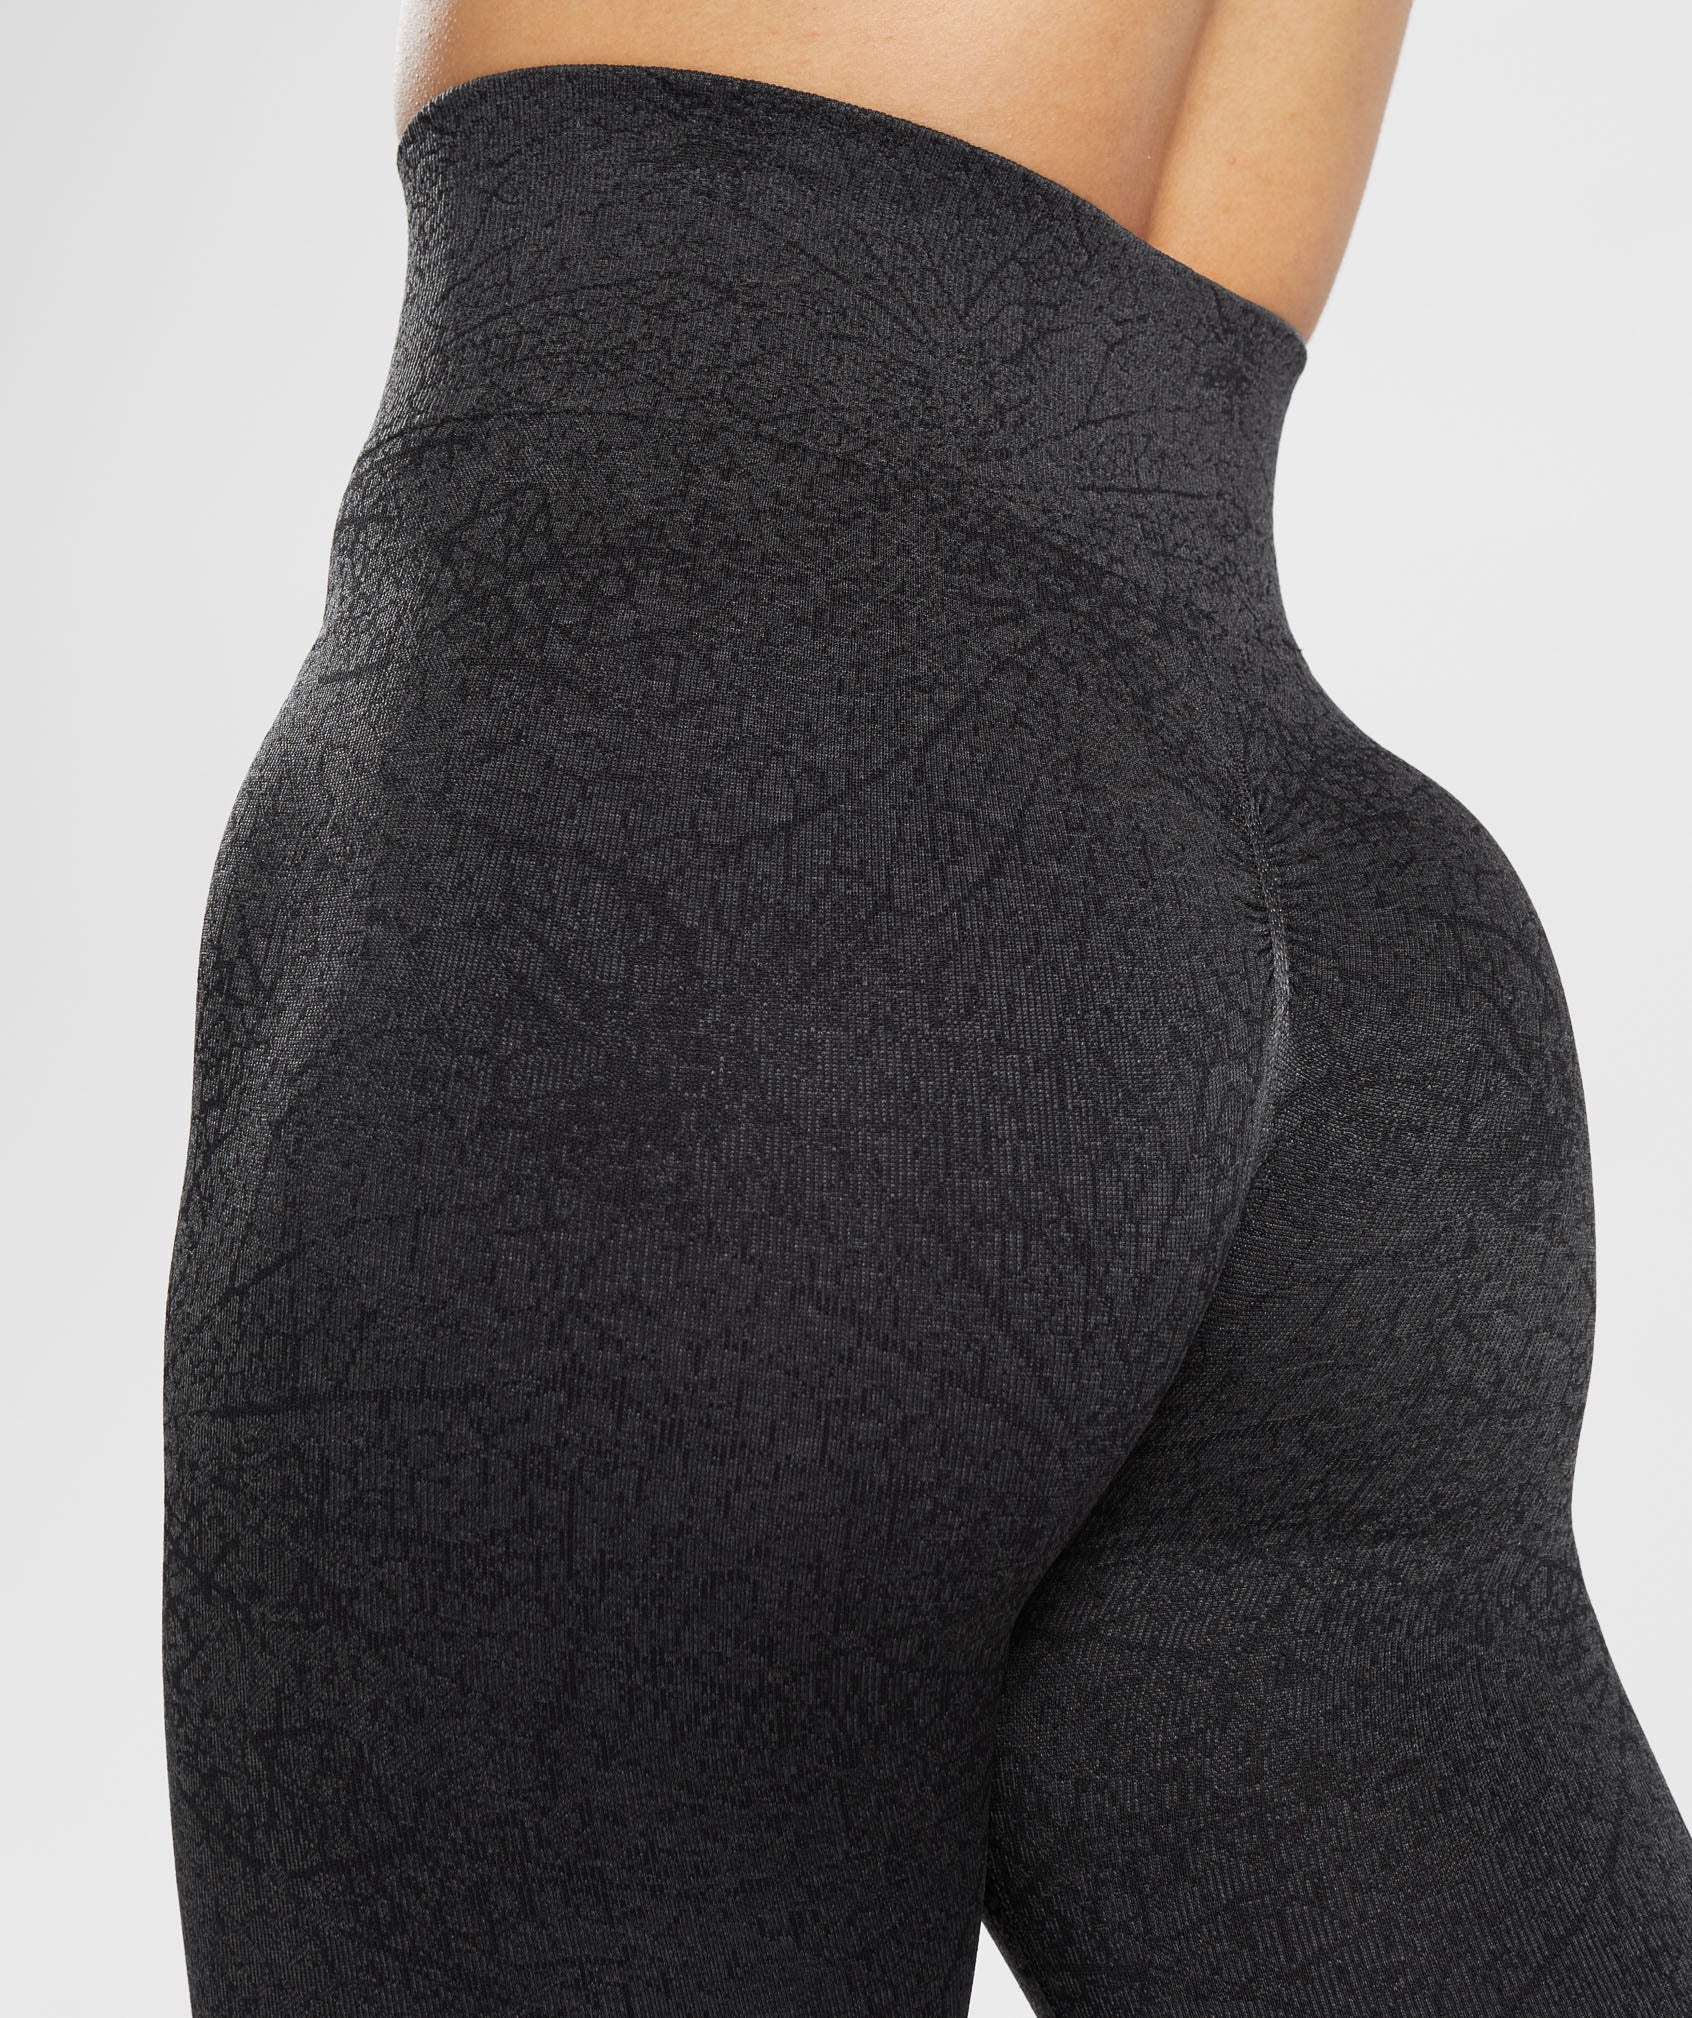 Be quick 💪 The Black.Charcoal ADAPT seamless leggings are finally  #BackInStock.